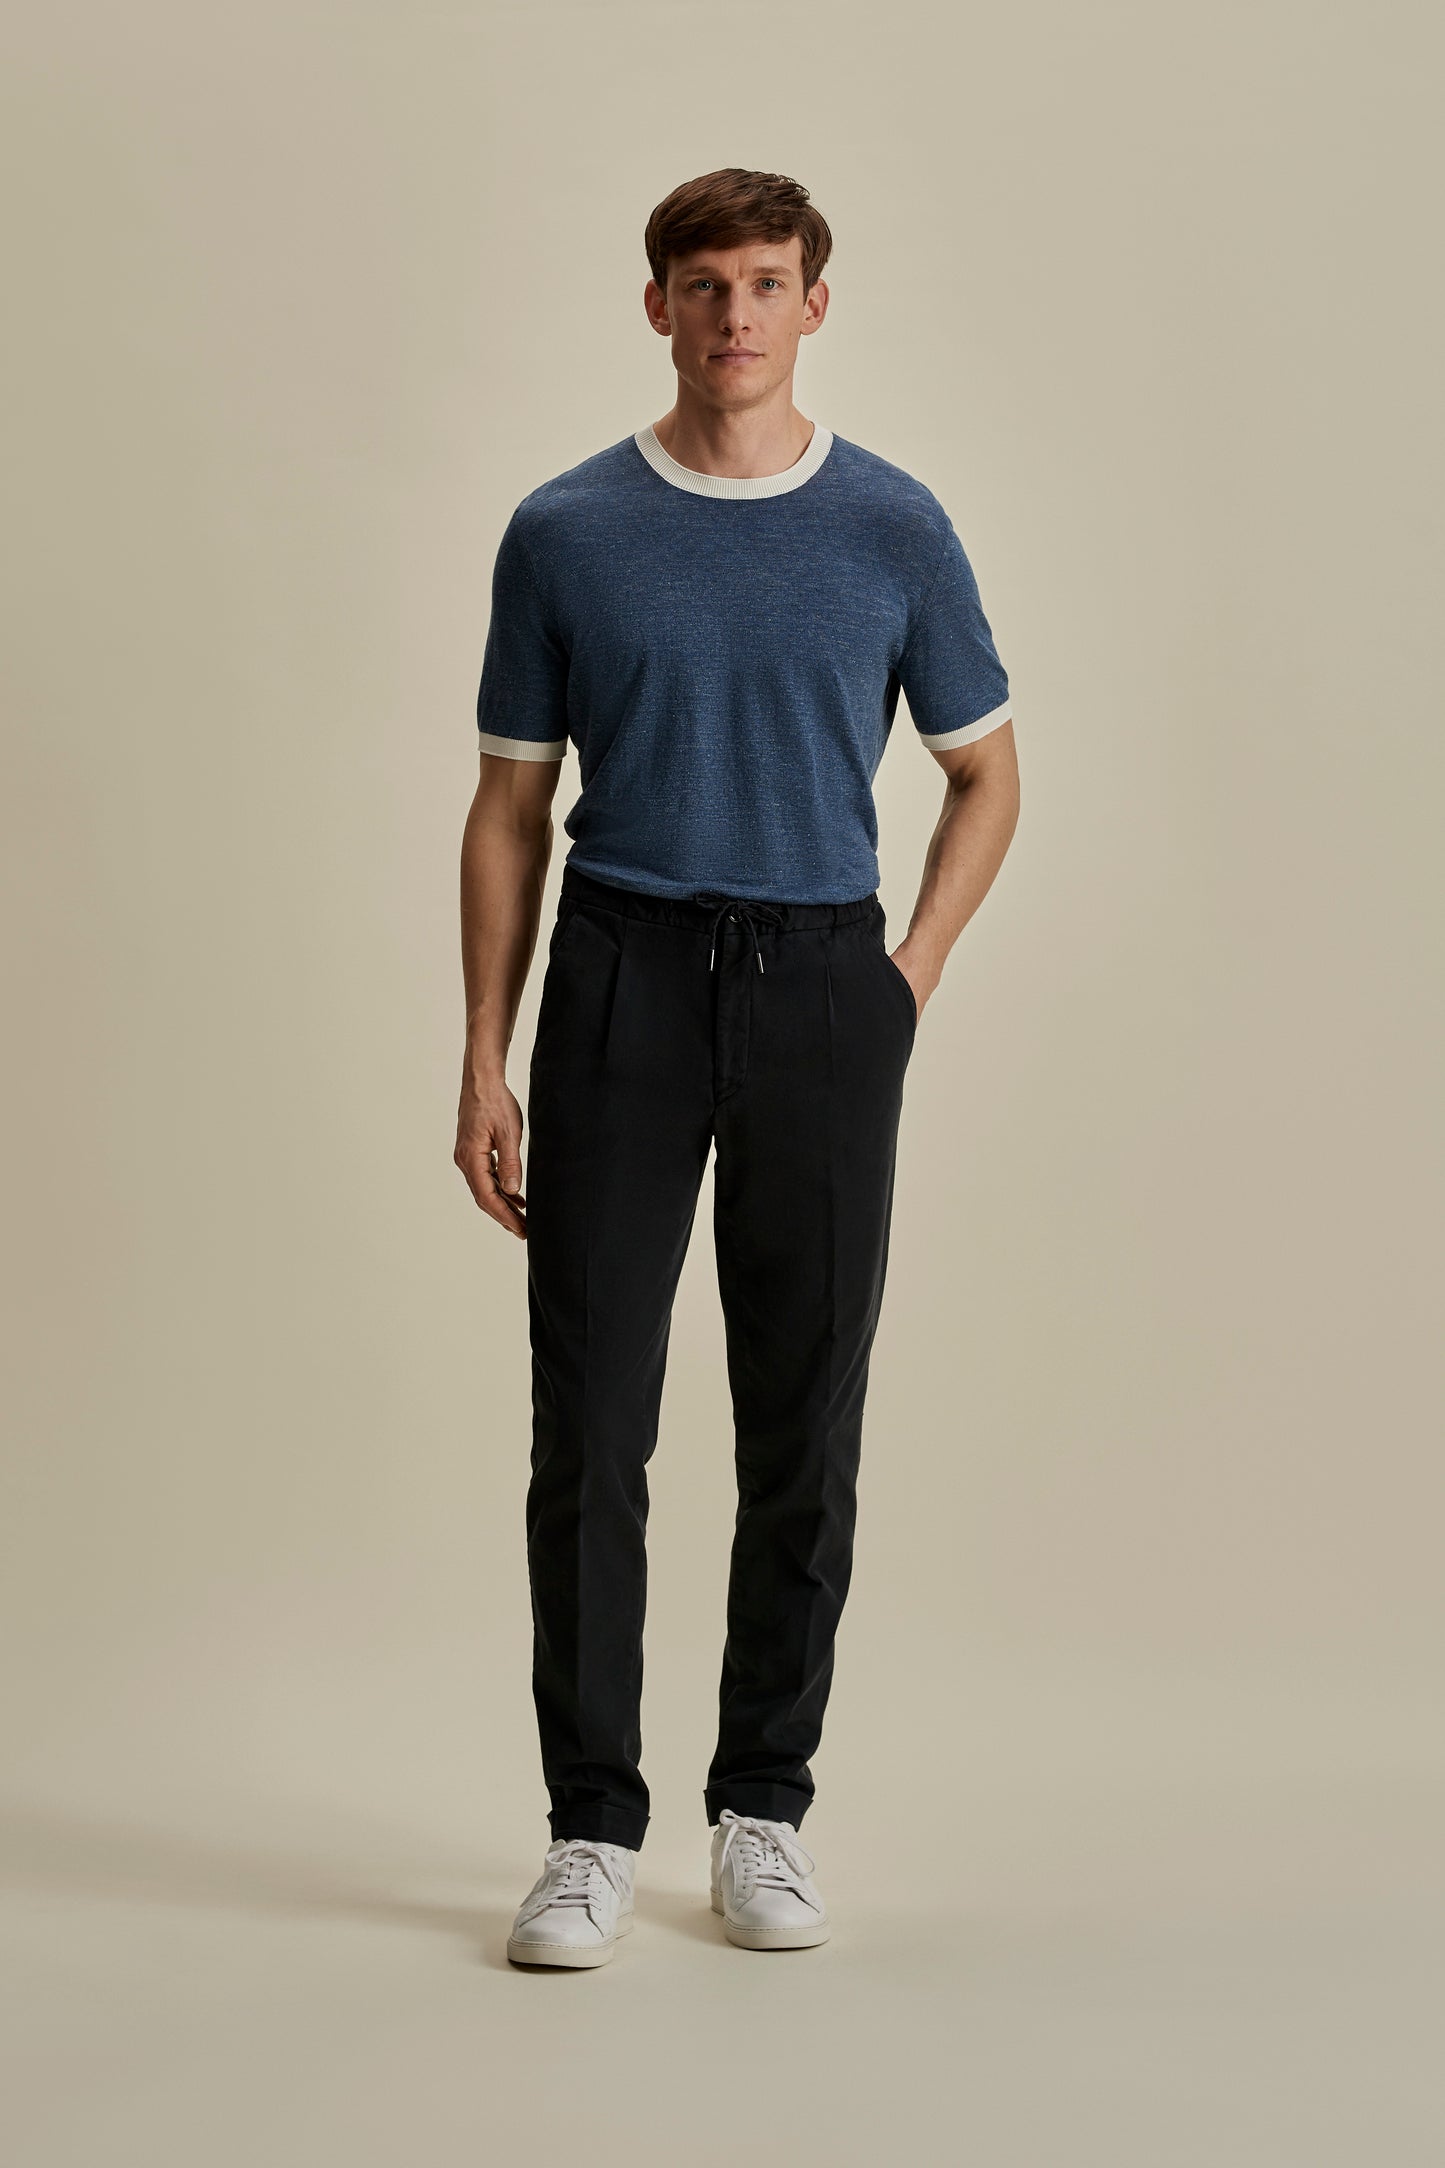 Cotton Twill Drawstring Tailored Trousers Navy Full Length Model Image